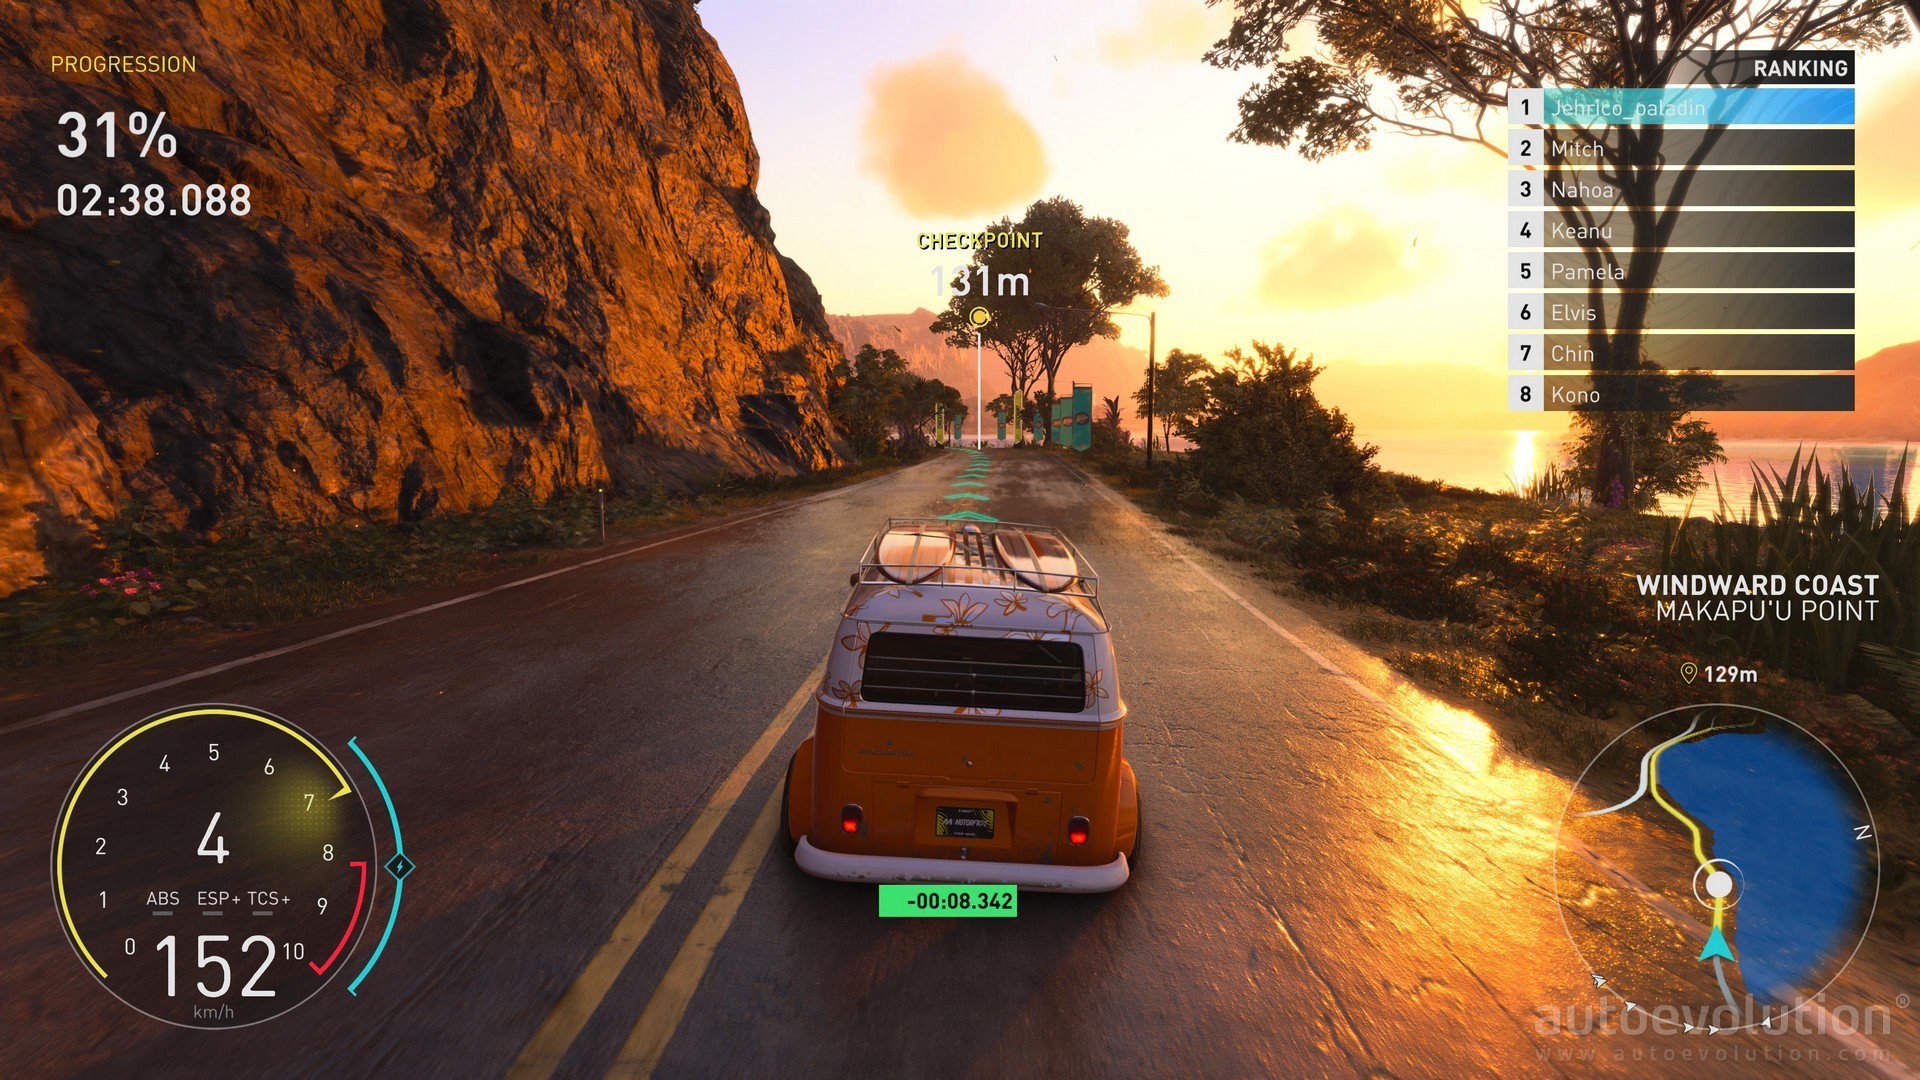 The Crew Motorfest review: Streets ahead - Video Games on Sports Illustrated